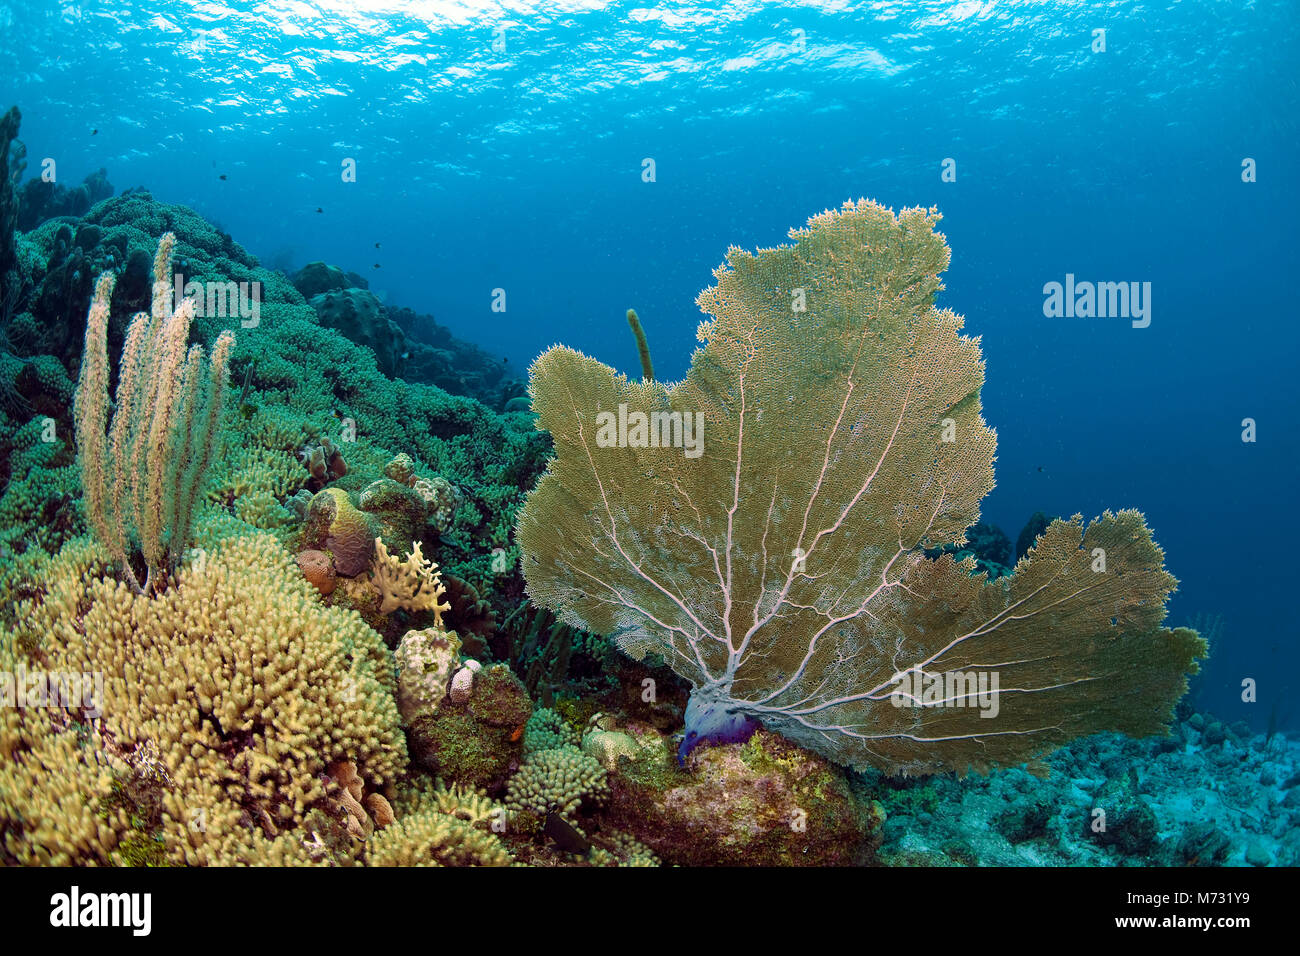 Healthy caribbean coral reef with a giant seafan (Gorgonia ventalina), Curacao, Netherland Antilles, Caribbean, Caribbean sea Stock Photo